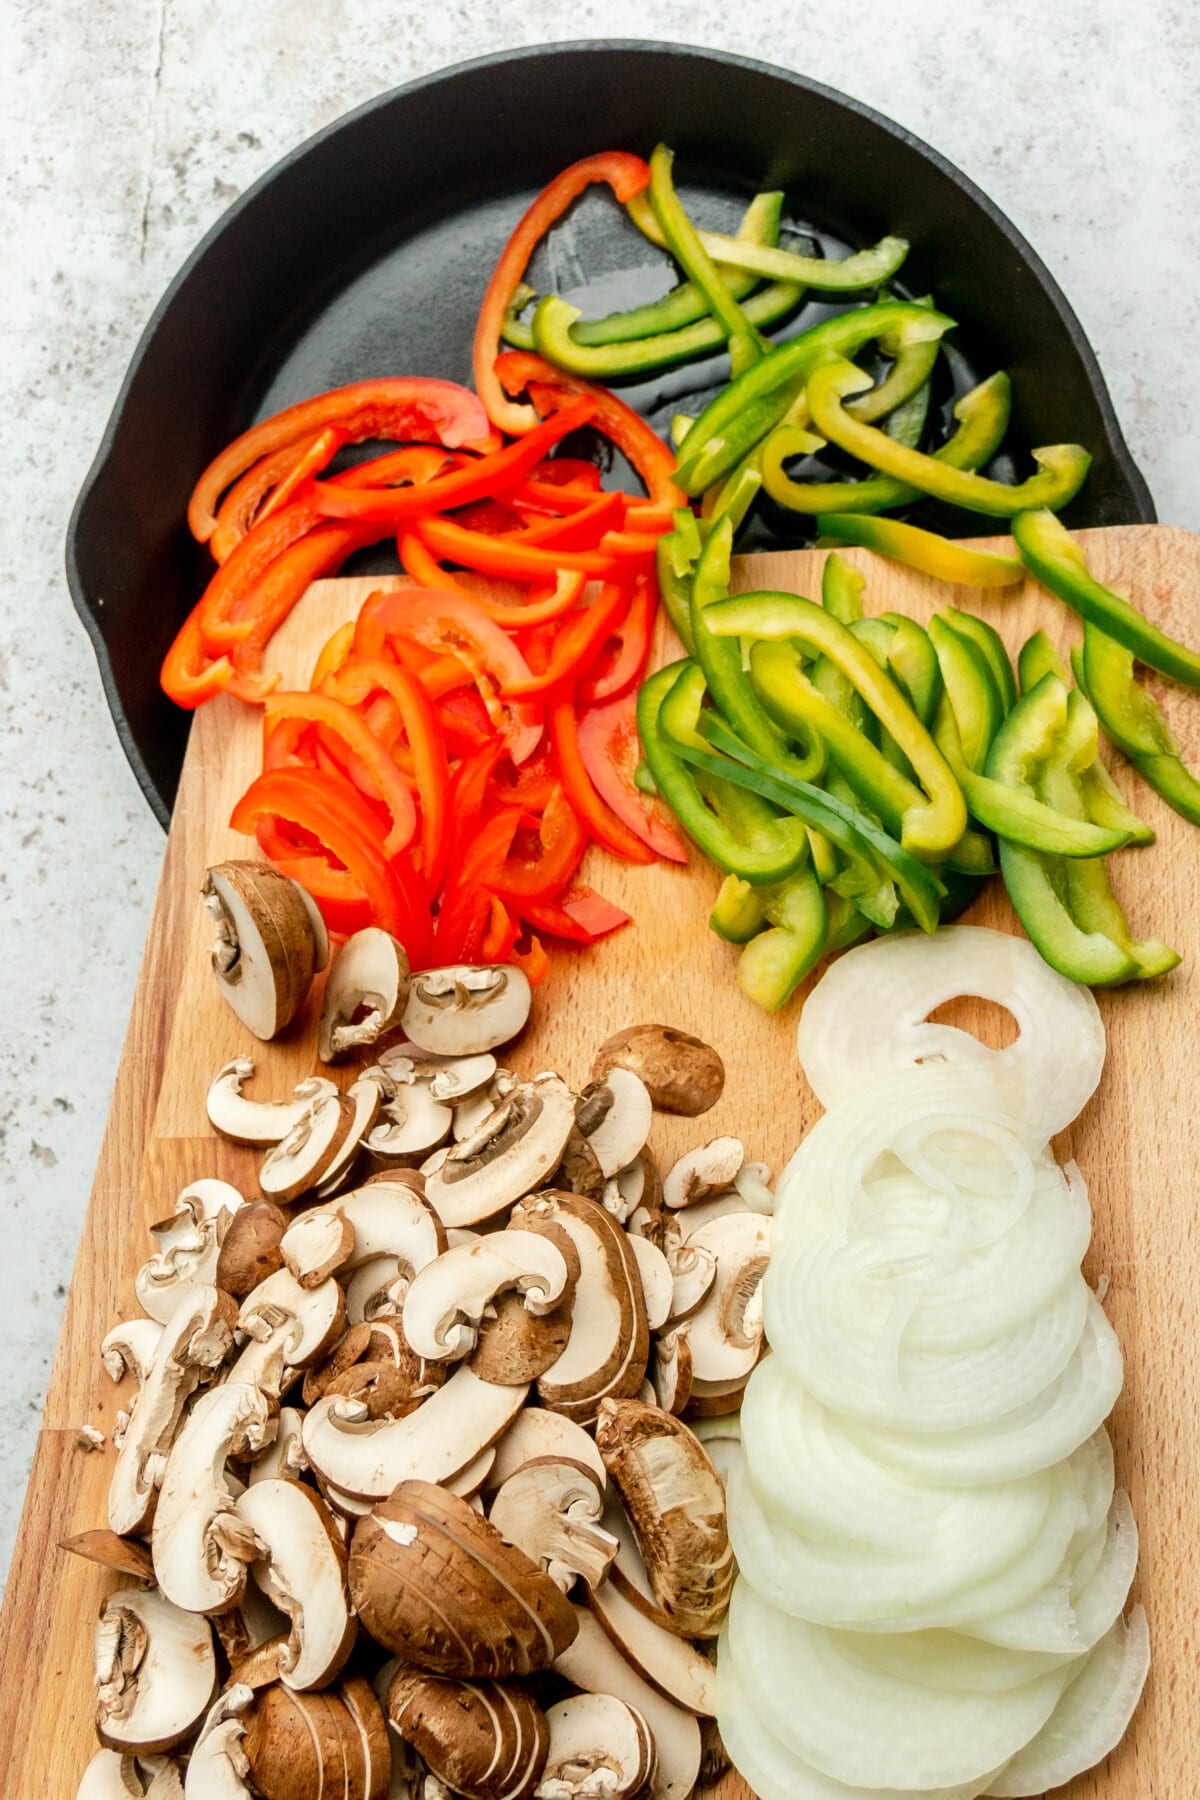 Vegetables are slid into a cast iron skillet from a chopping board sitting on a light grey colored surface.